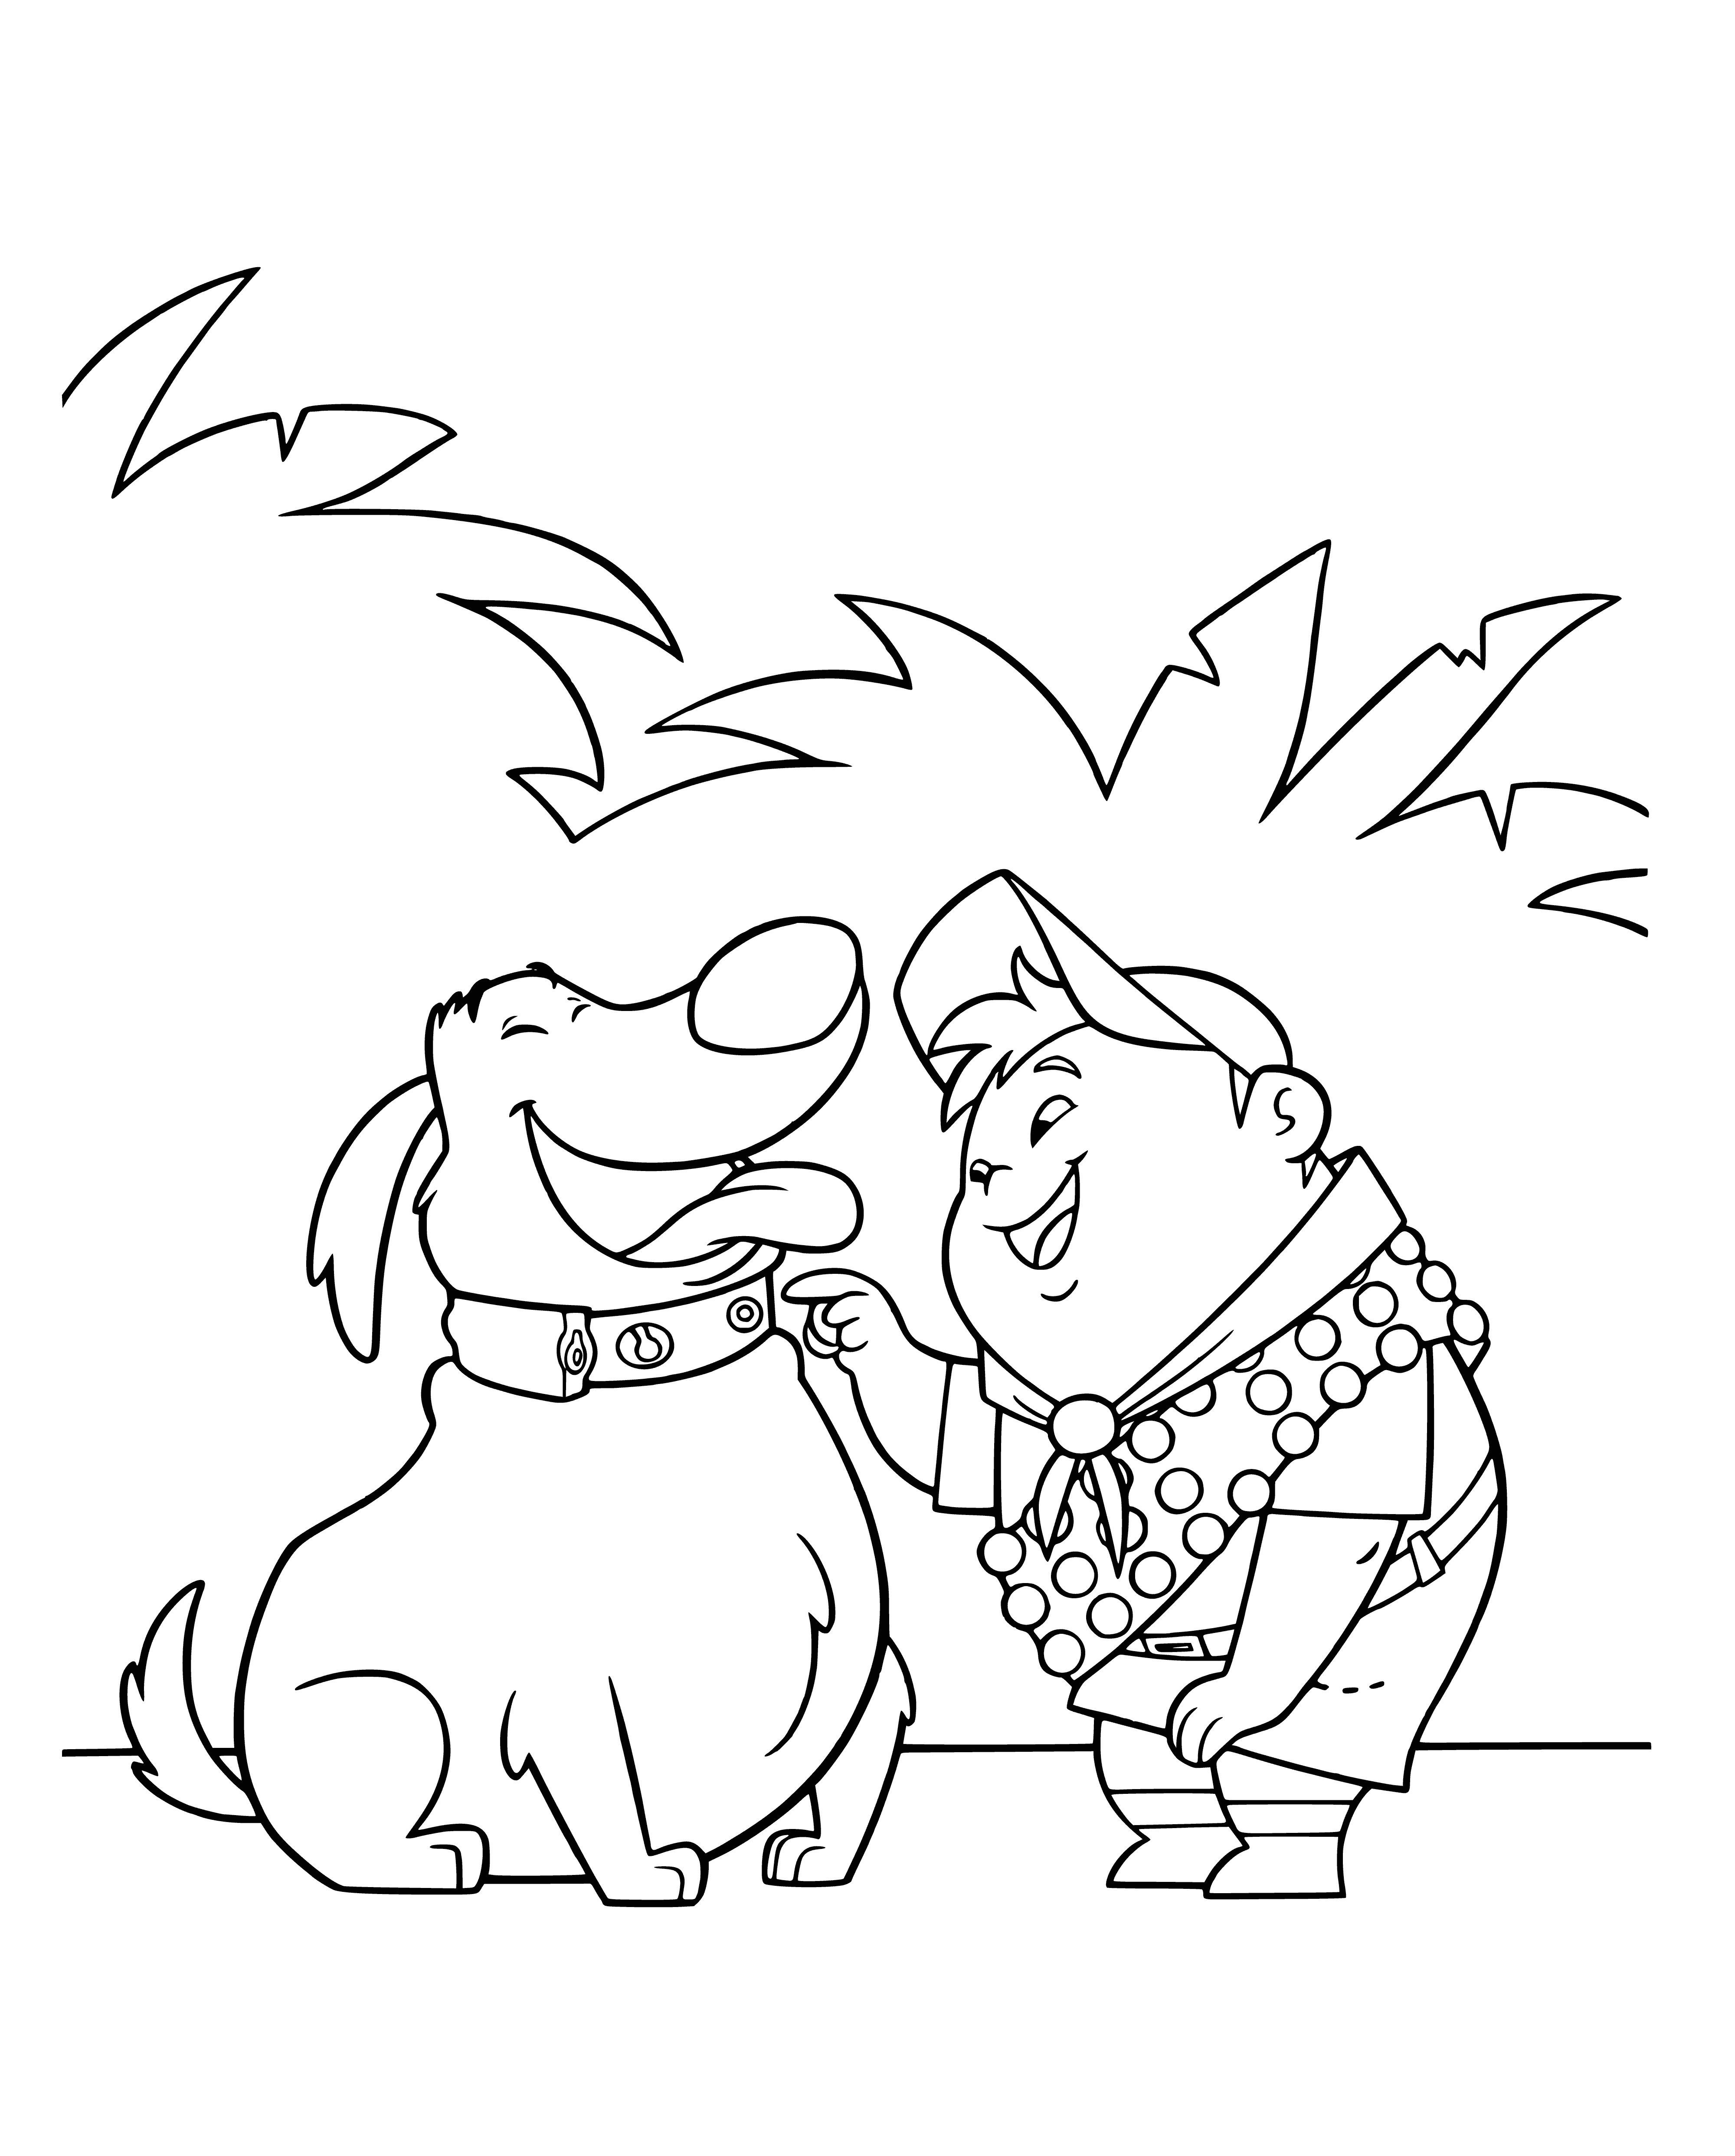 Doug and Russell coloring page